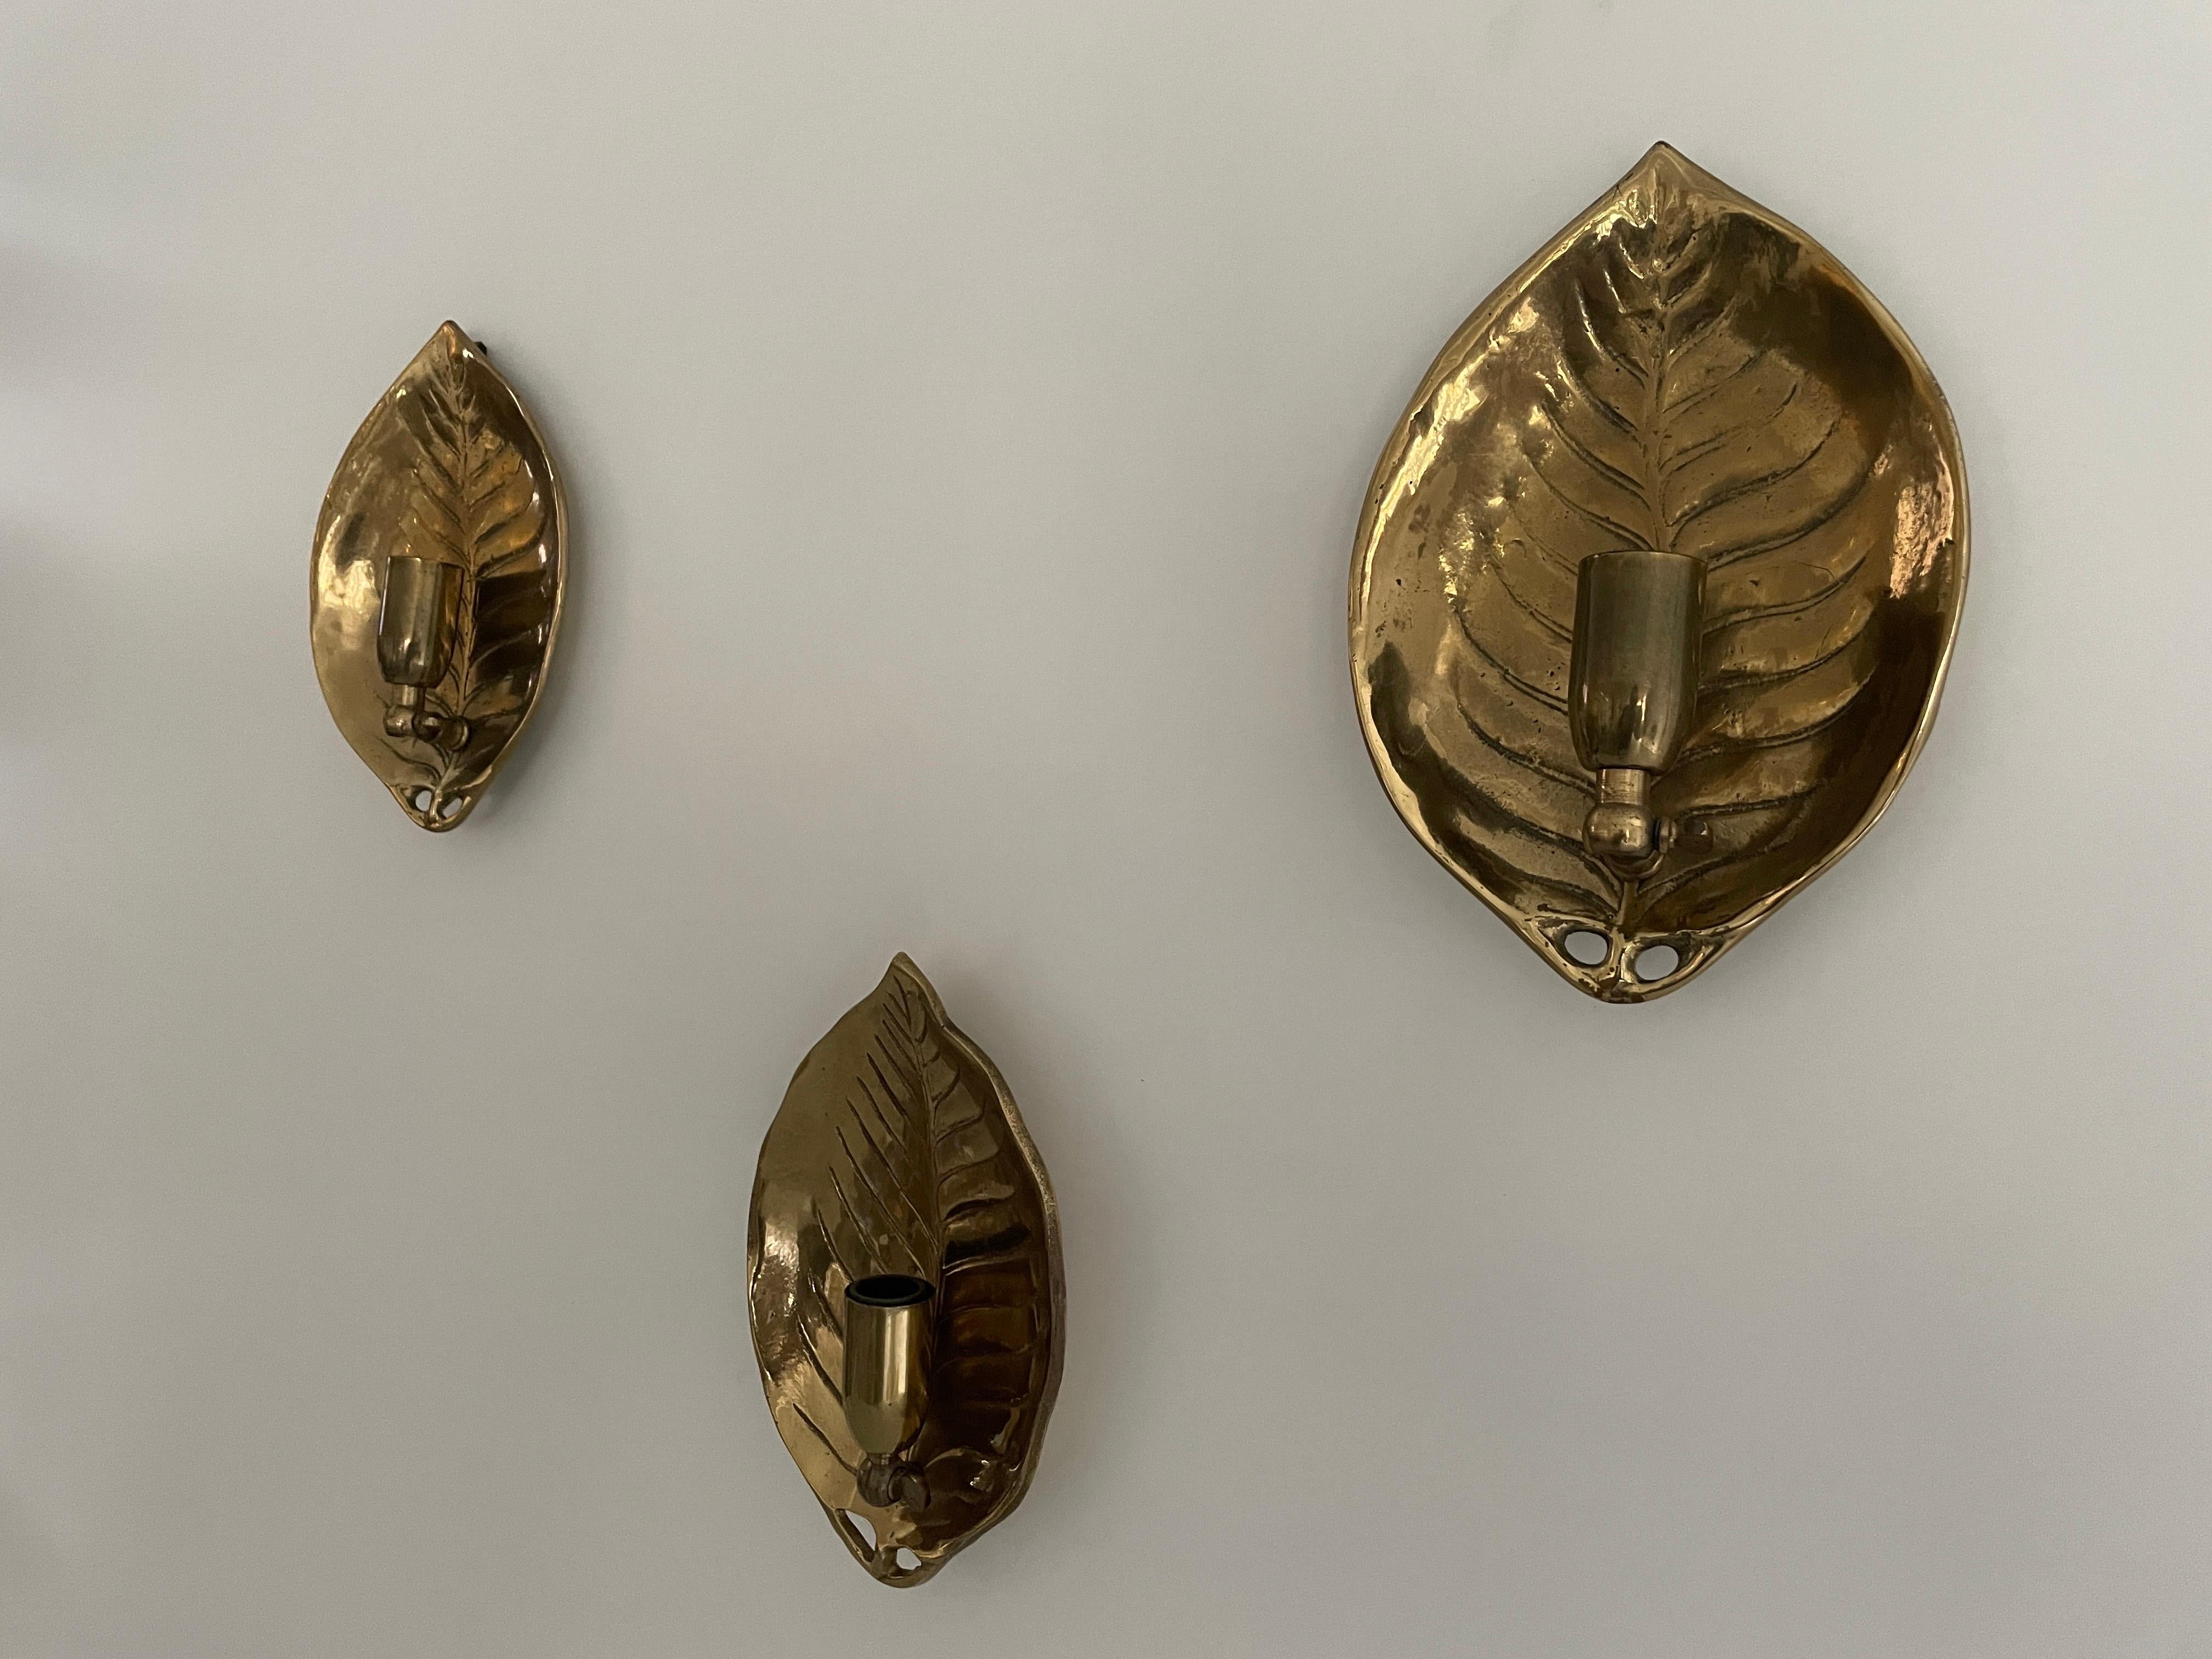 Mid-century Modern Leaf Design Heavy Brass Set of 3 Sconces, 1960s, Germany

Very elegant and Minimalist wall lamps.
These are heavy lamps  (1 piece: 900 grams)

Lamps are in excellent condition.

These lamps works with E27 standard light bulbs.